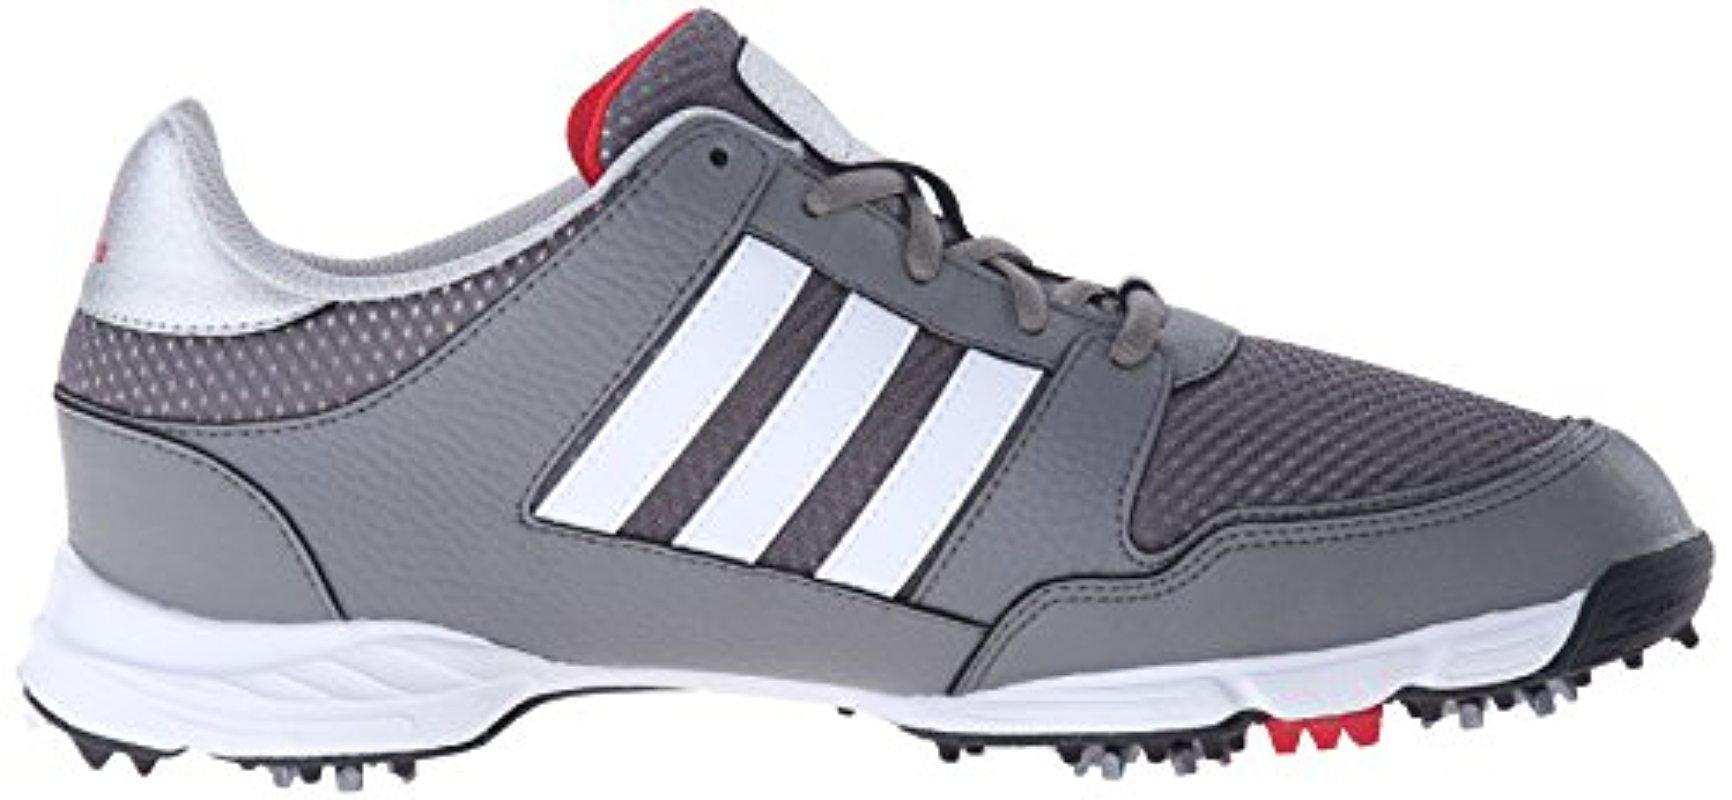 adidas men's tech response 4.0 wd golf cleated